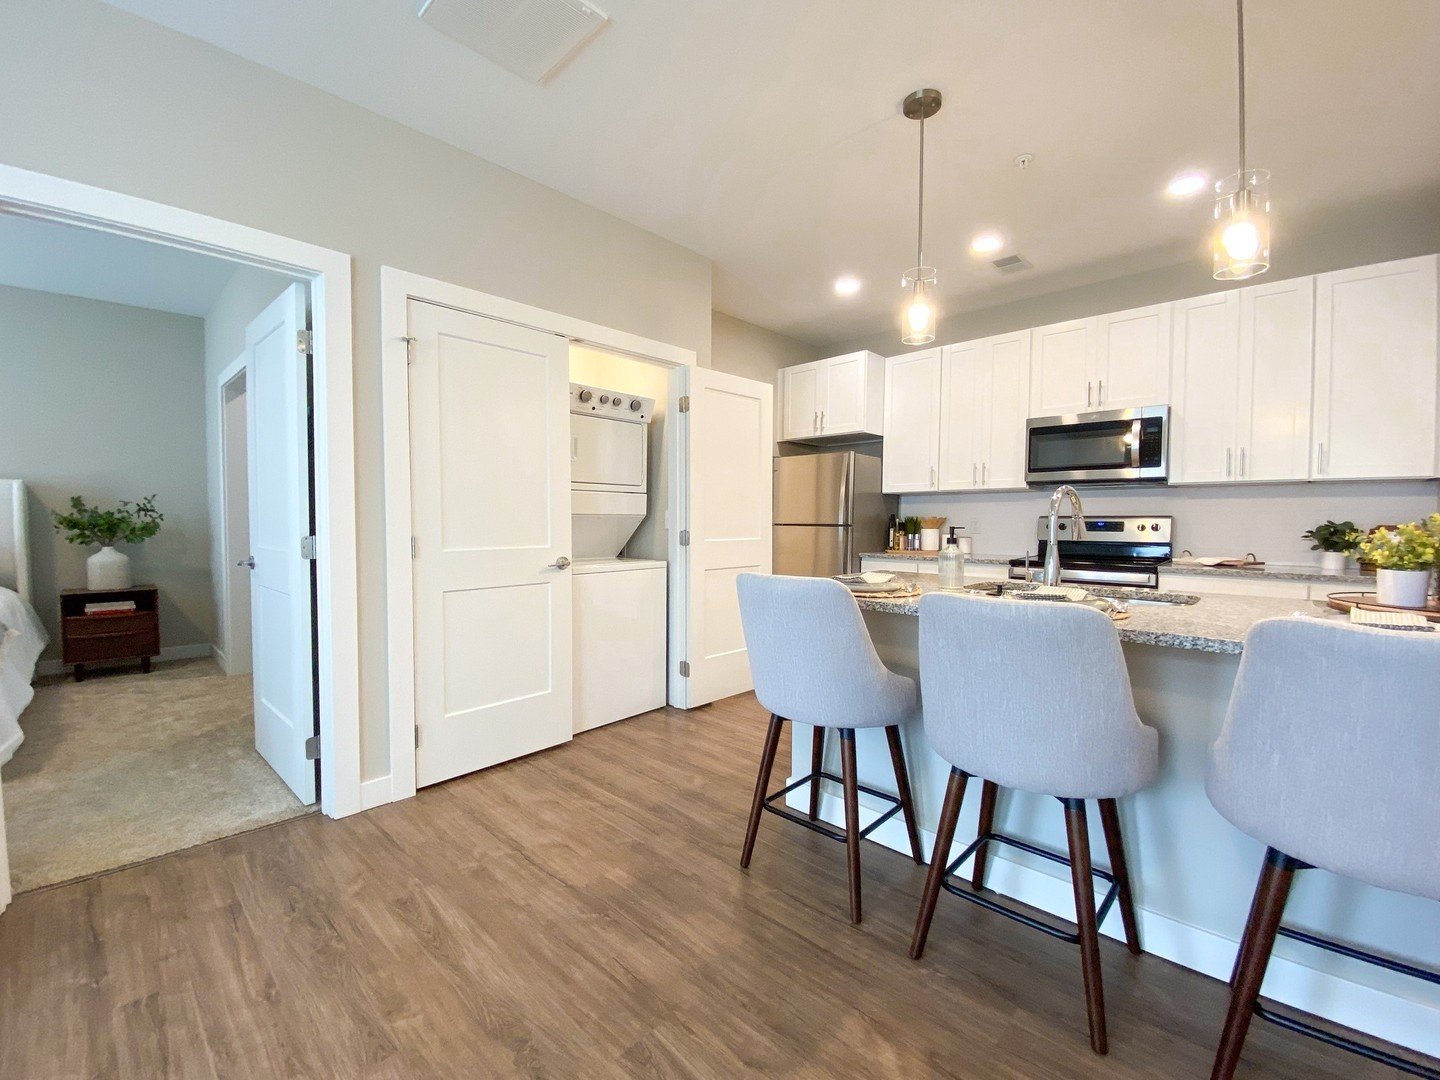 You can't beat these open floor plans! Come and check them out for yourself &amp; make Camden Park Apartments your future home 🌟